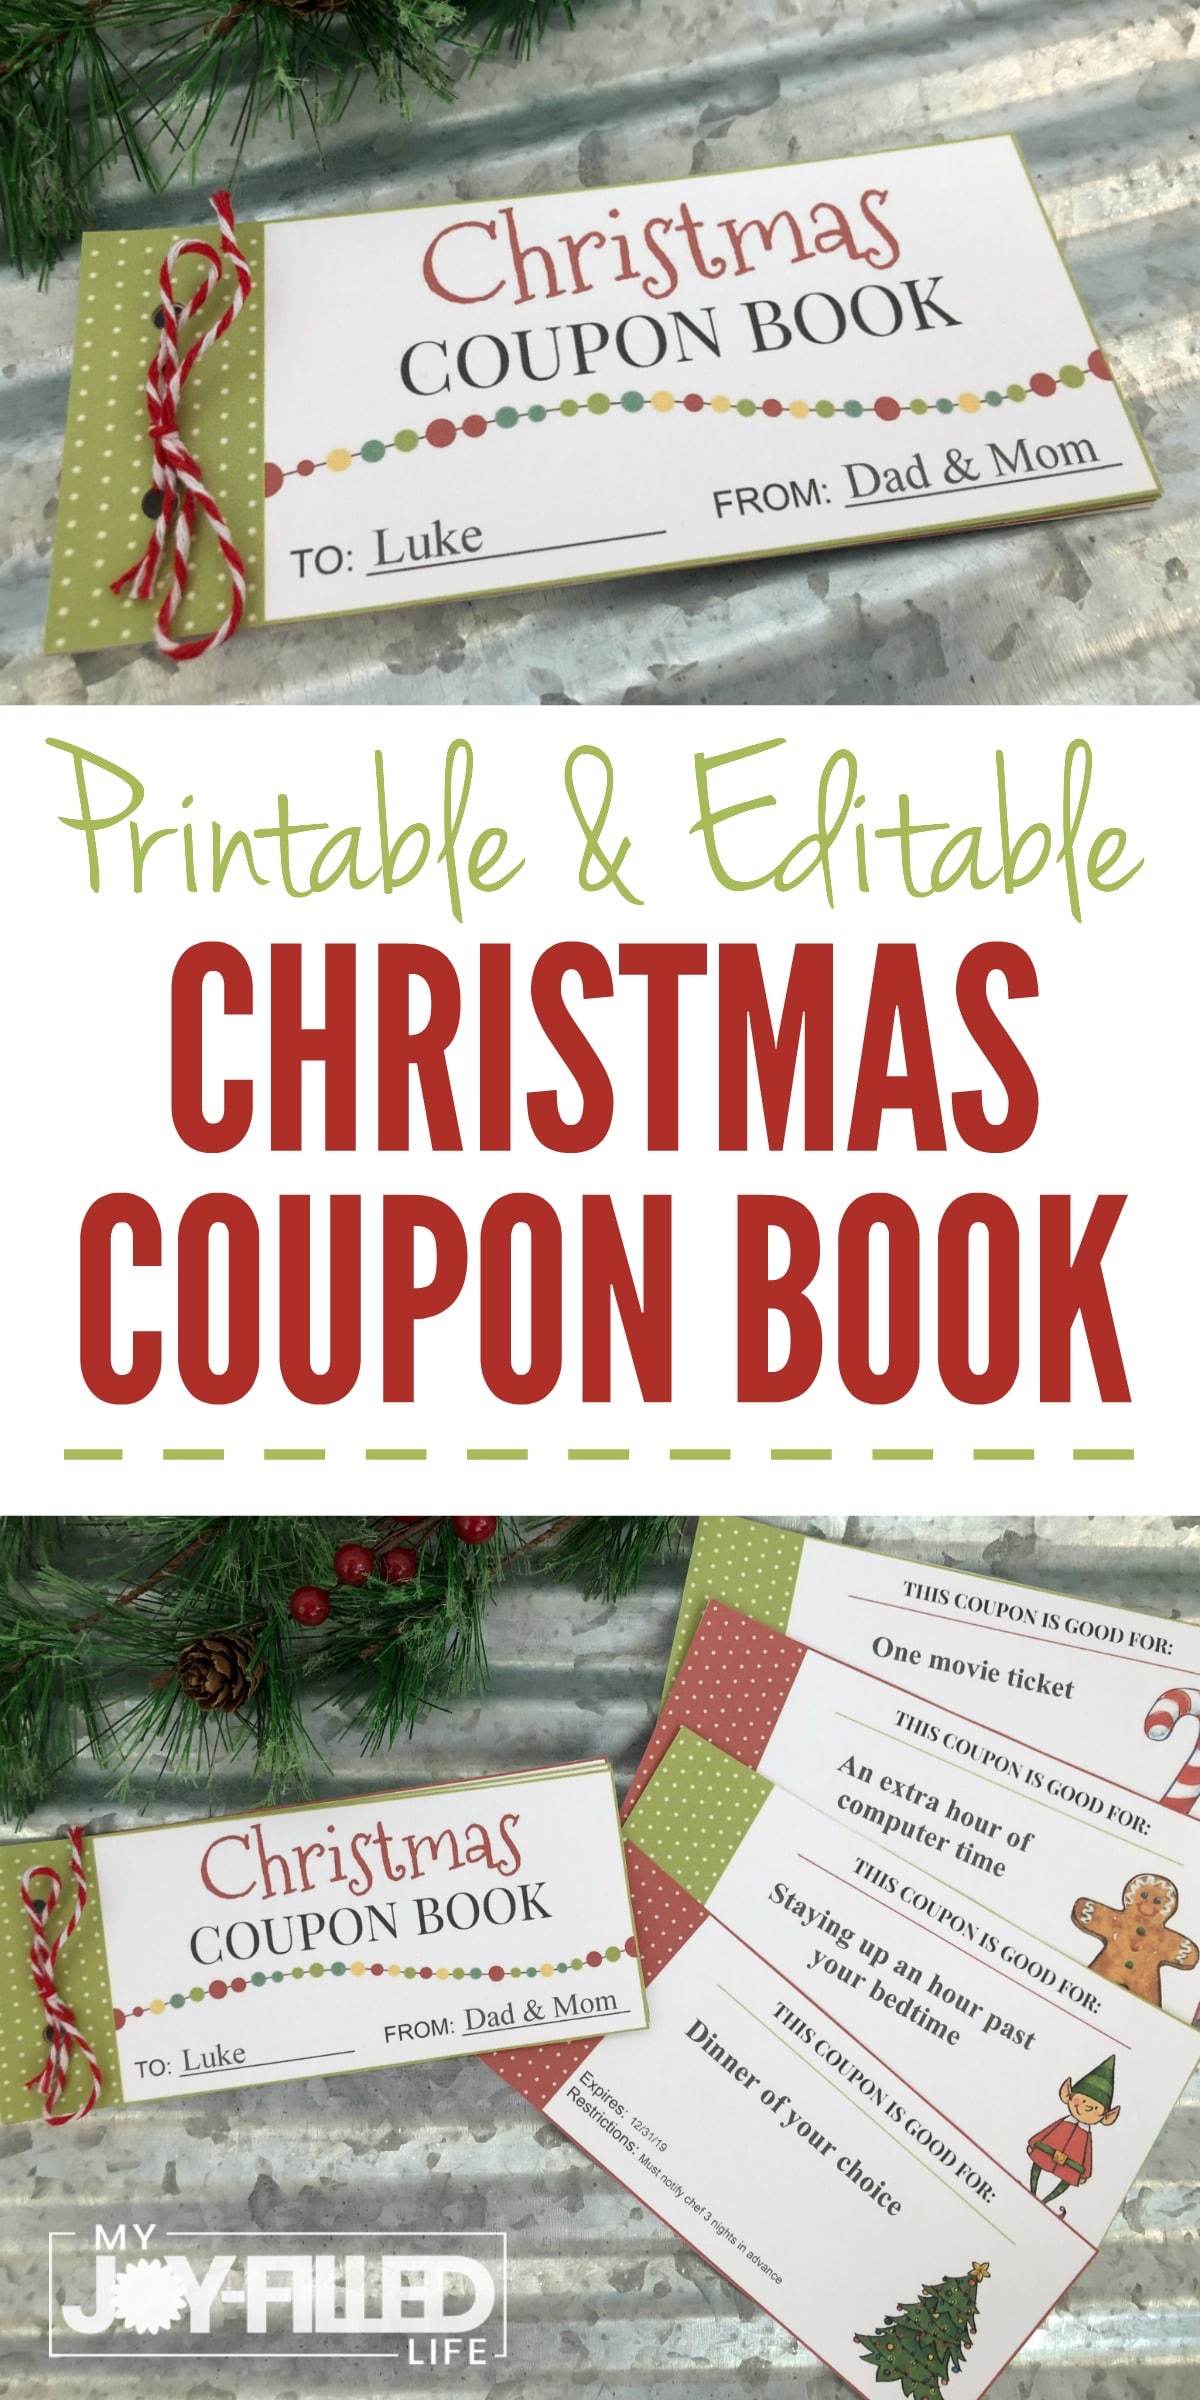 If you need a last minute Christmas gift, this printable and editable Christmas Coupon Book is the perfect thing! Totally customizable! #christmas #christmasgift #homemadechristmas #lastminutegift #couponbook